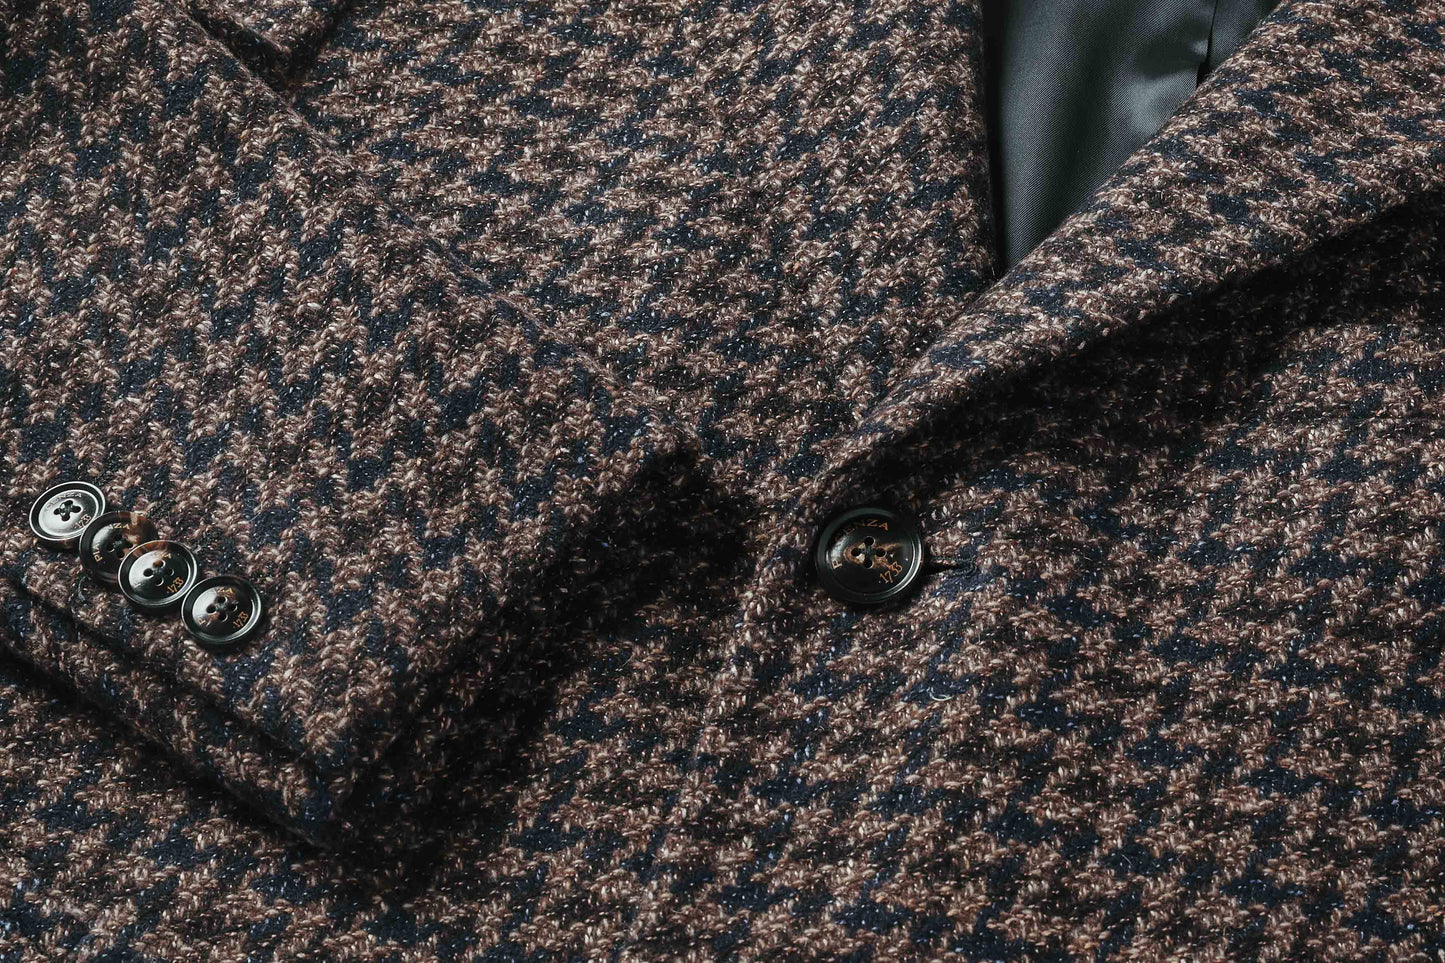 Single-breasted coat with slanted pockets